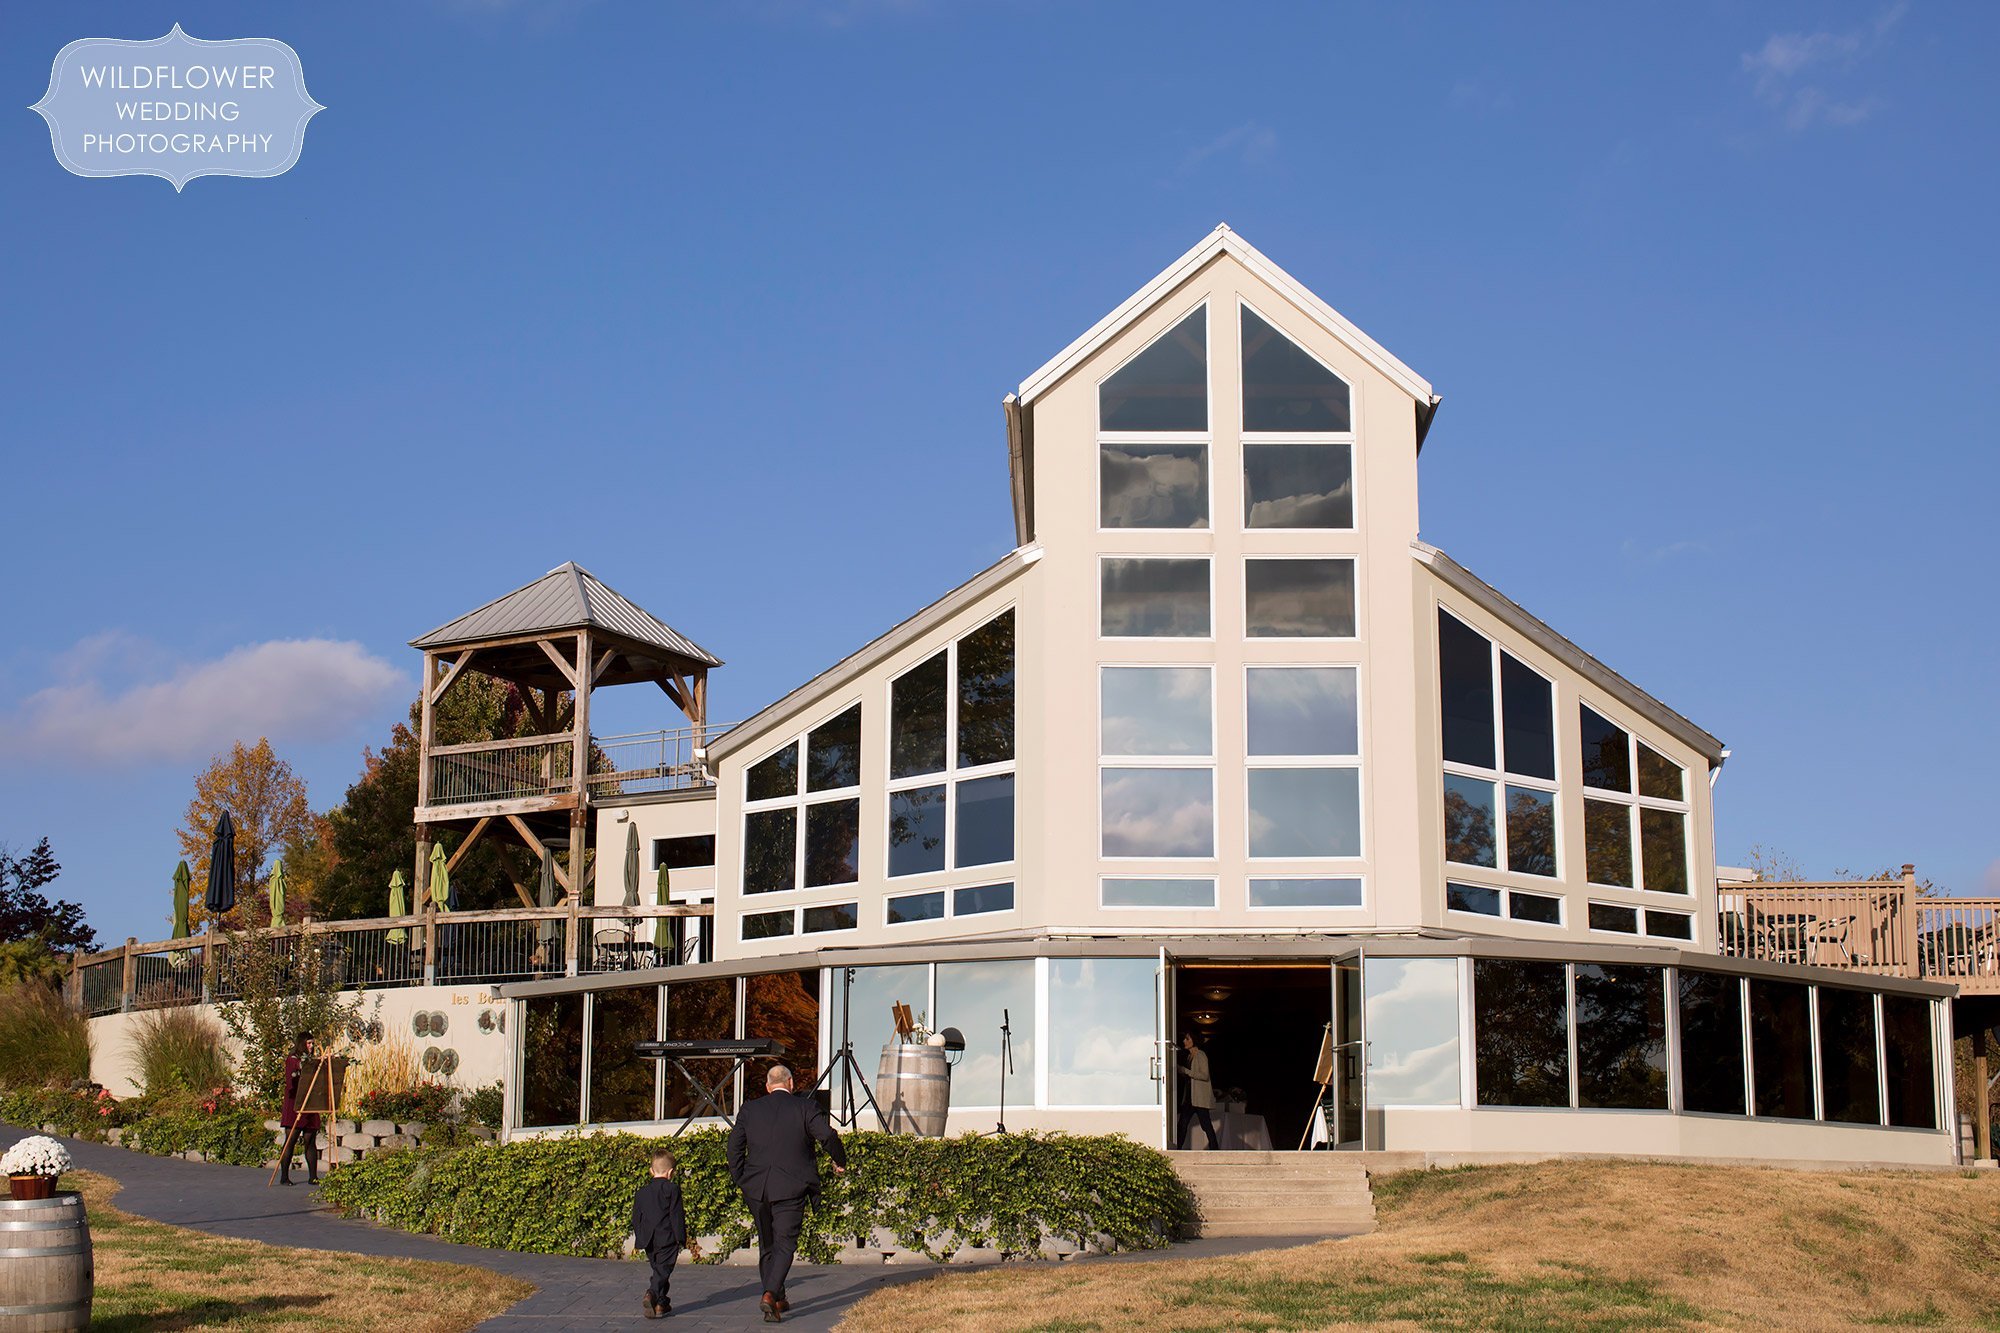 This Les Bourgeois October wedding venue is set on the Missouri River.